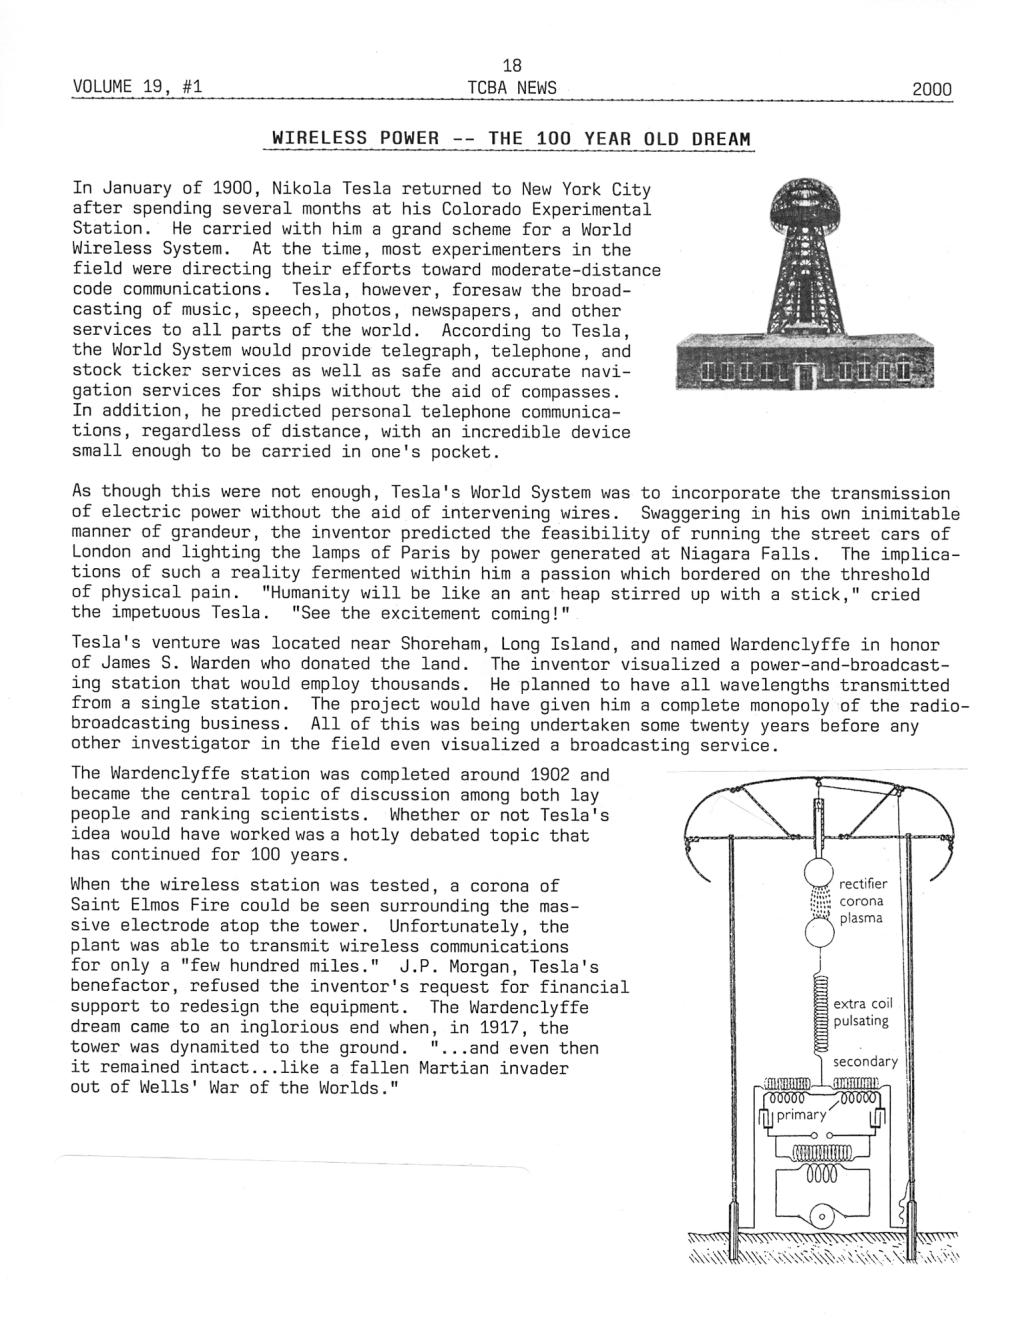 TCBA Volume 19 - Issue 1 - Page 18 of 18